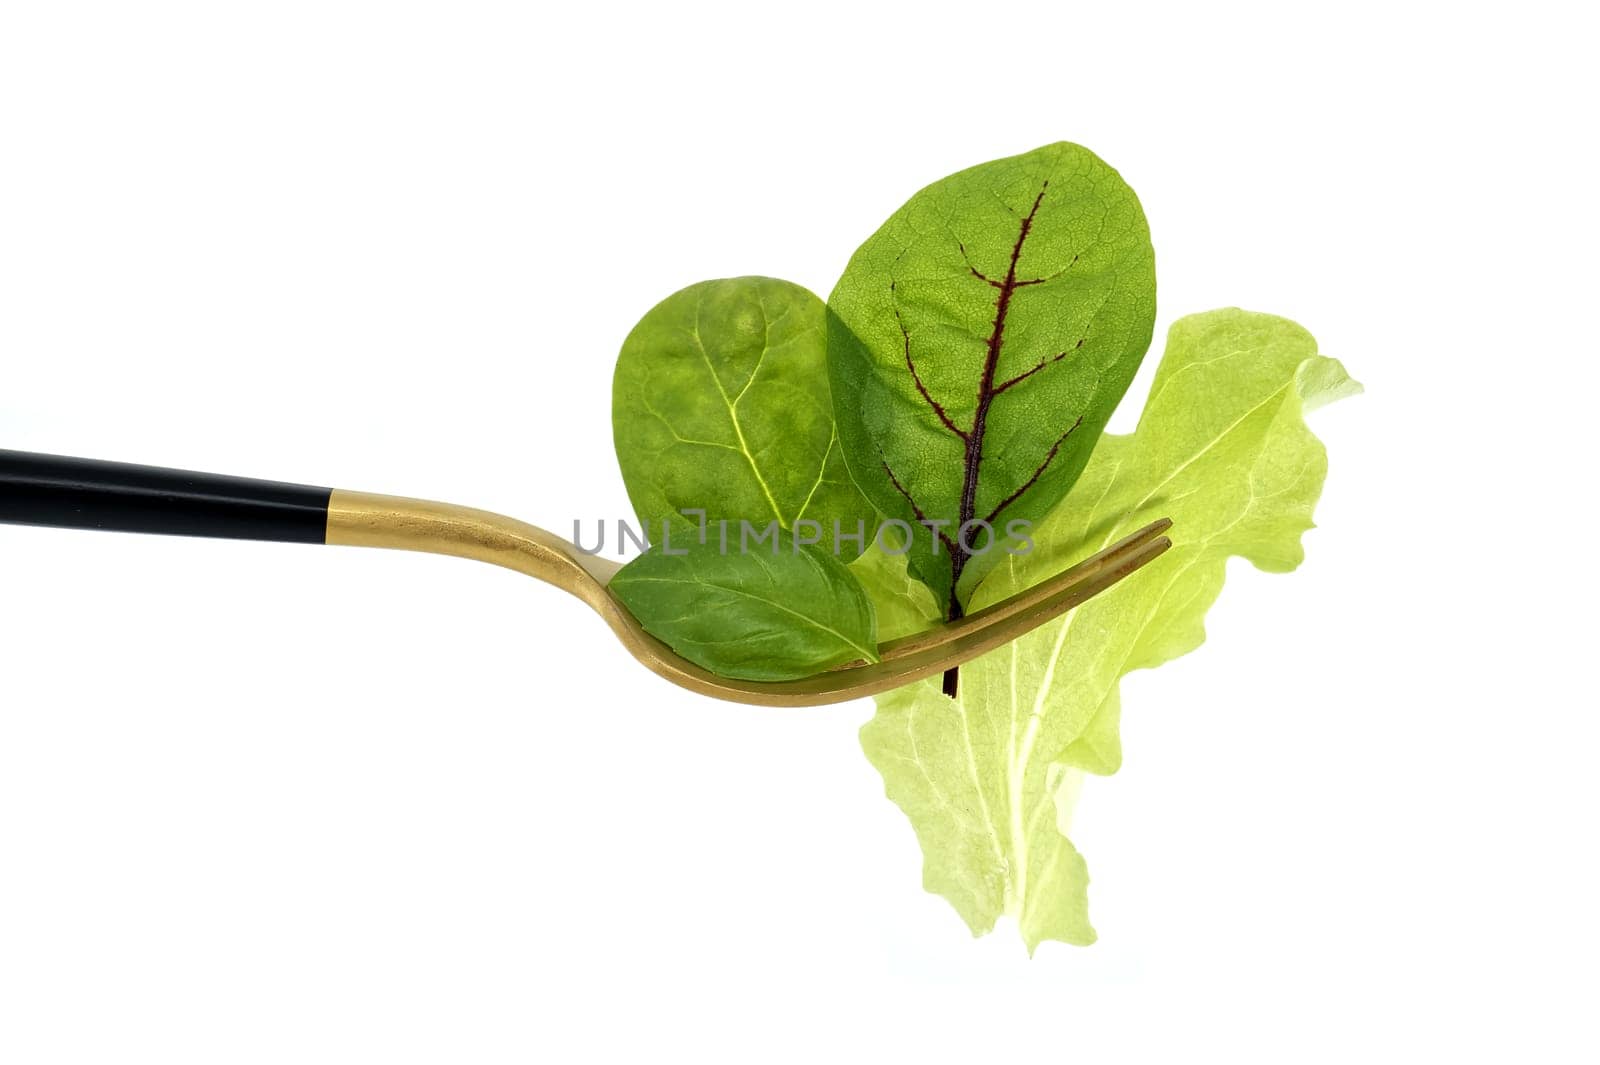 Fresh green tone of the lettuce leaves on gold fork isolated on white by NetPix